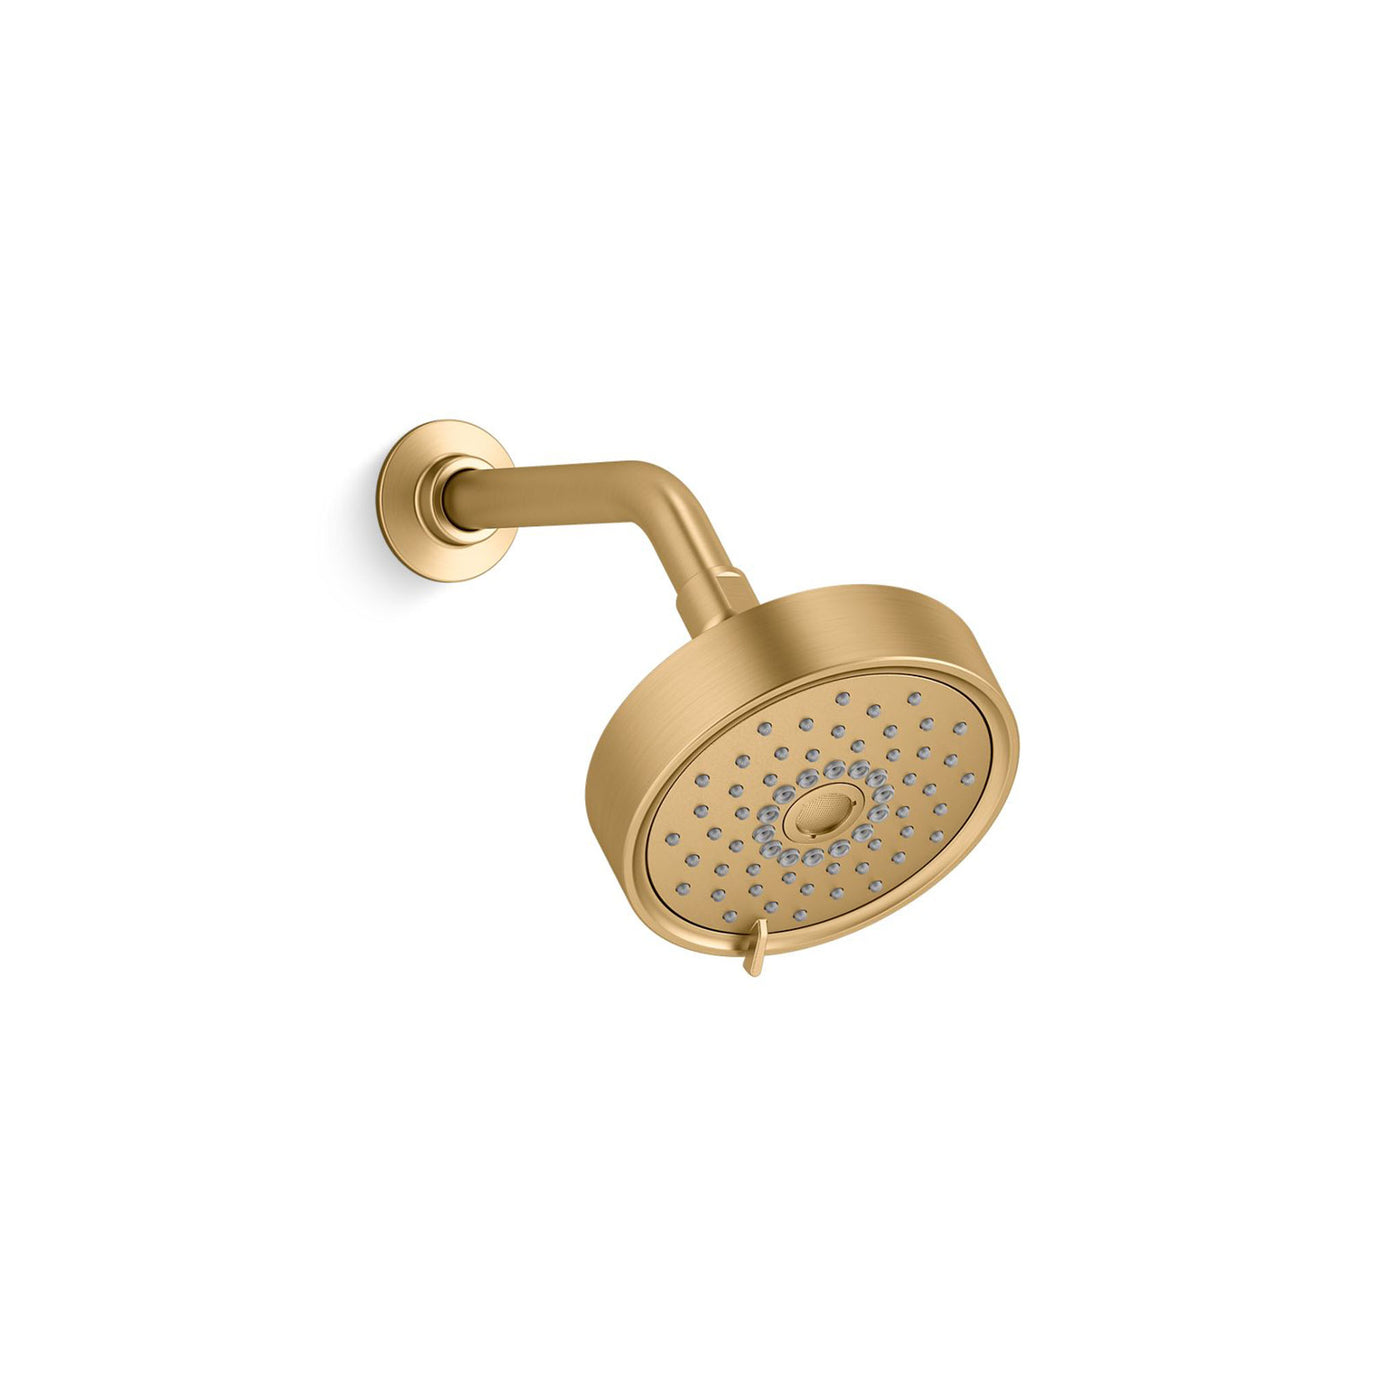 2.5 gpm Purist® Four-function showerhead